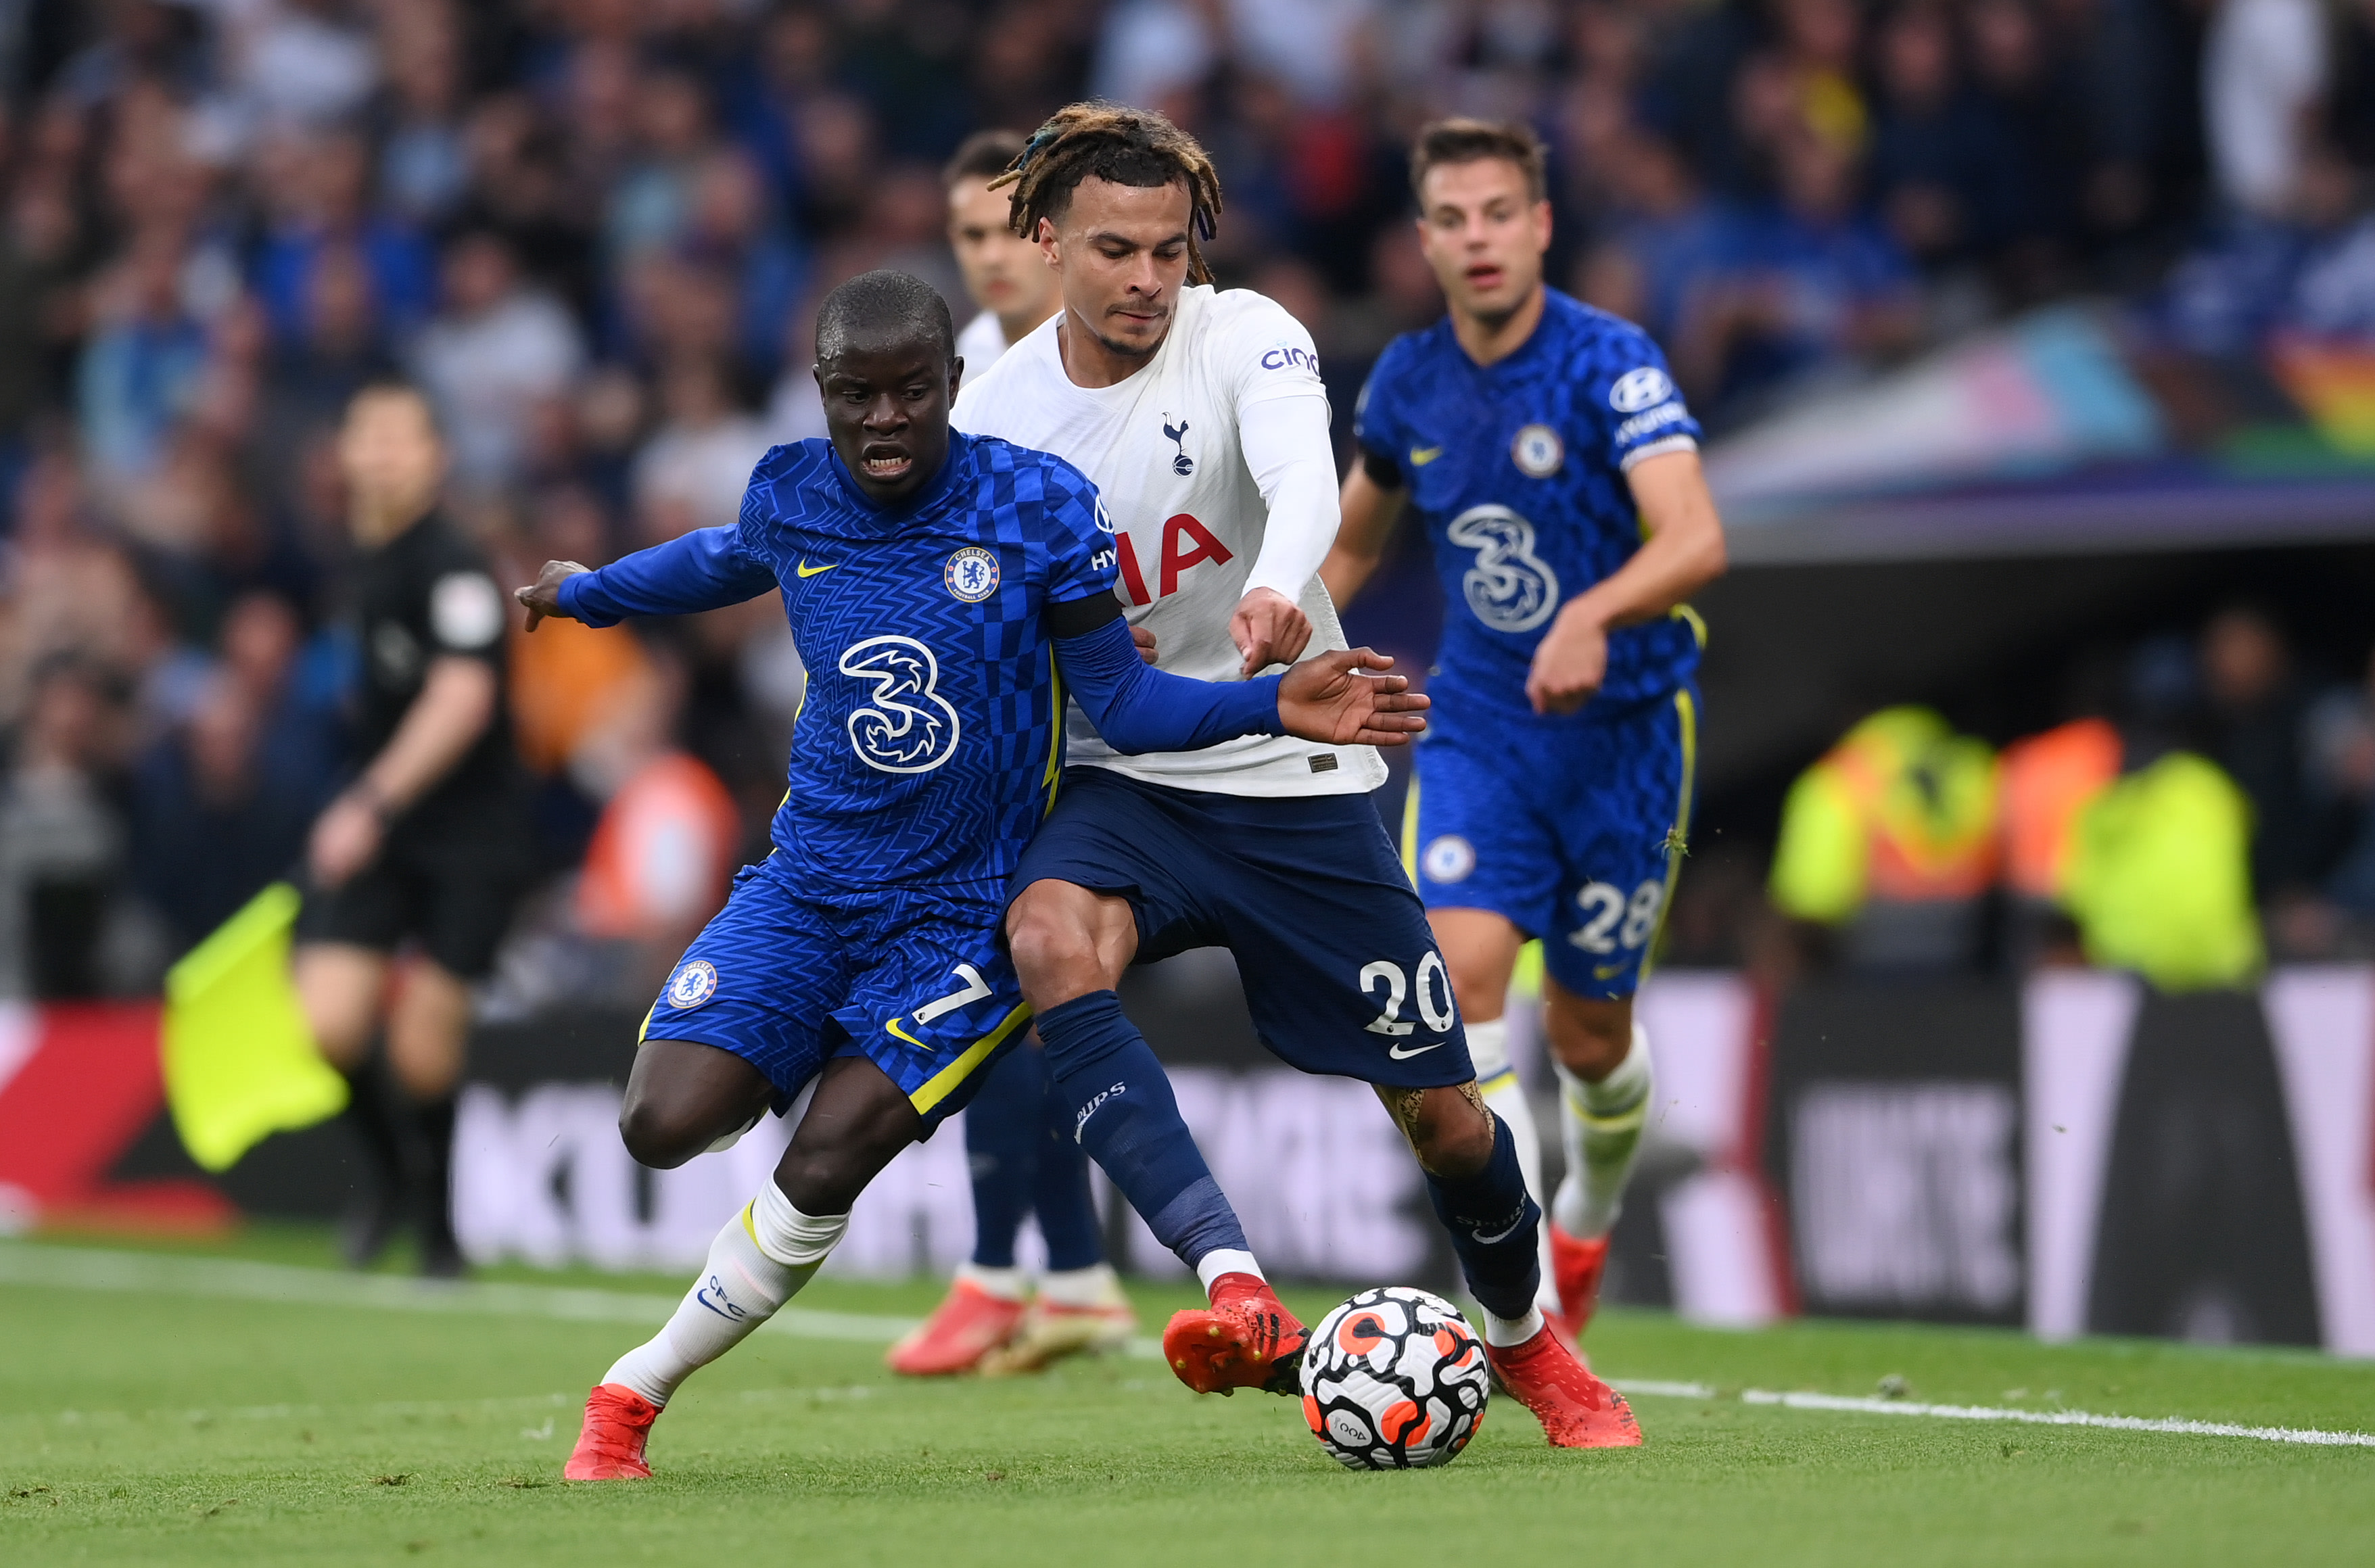 Spurs out of Europe after Uefa awards Rennes 3-0 win for cancelled game, Tottenham  Hotspur